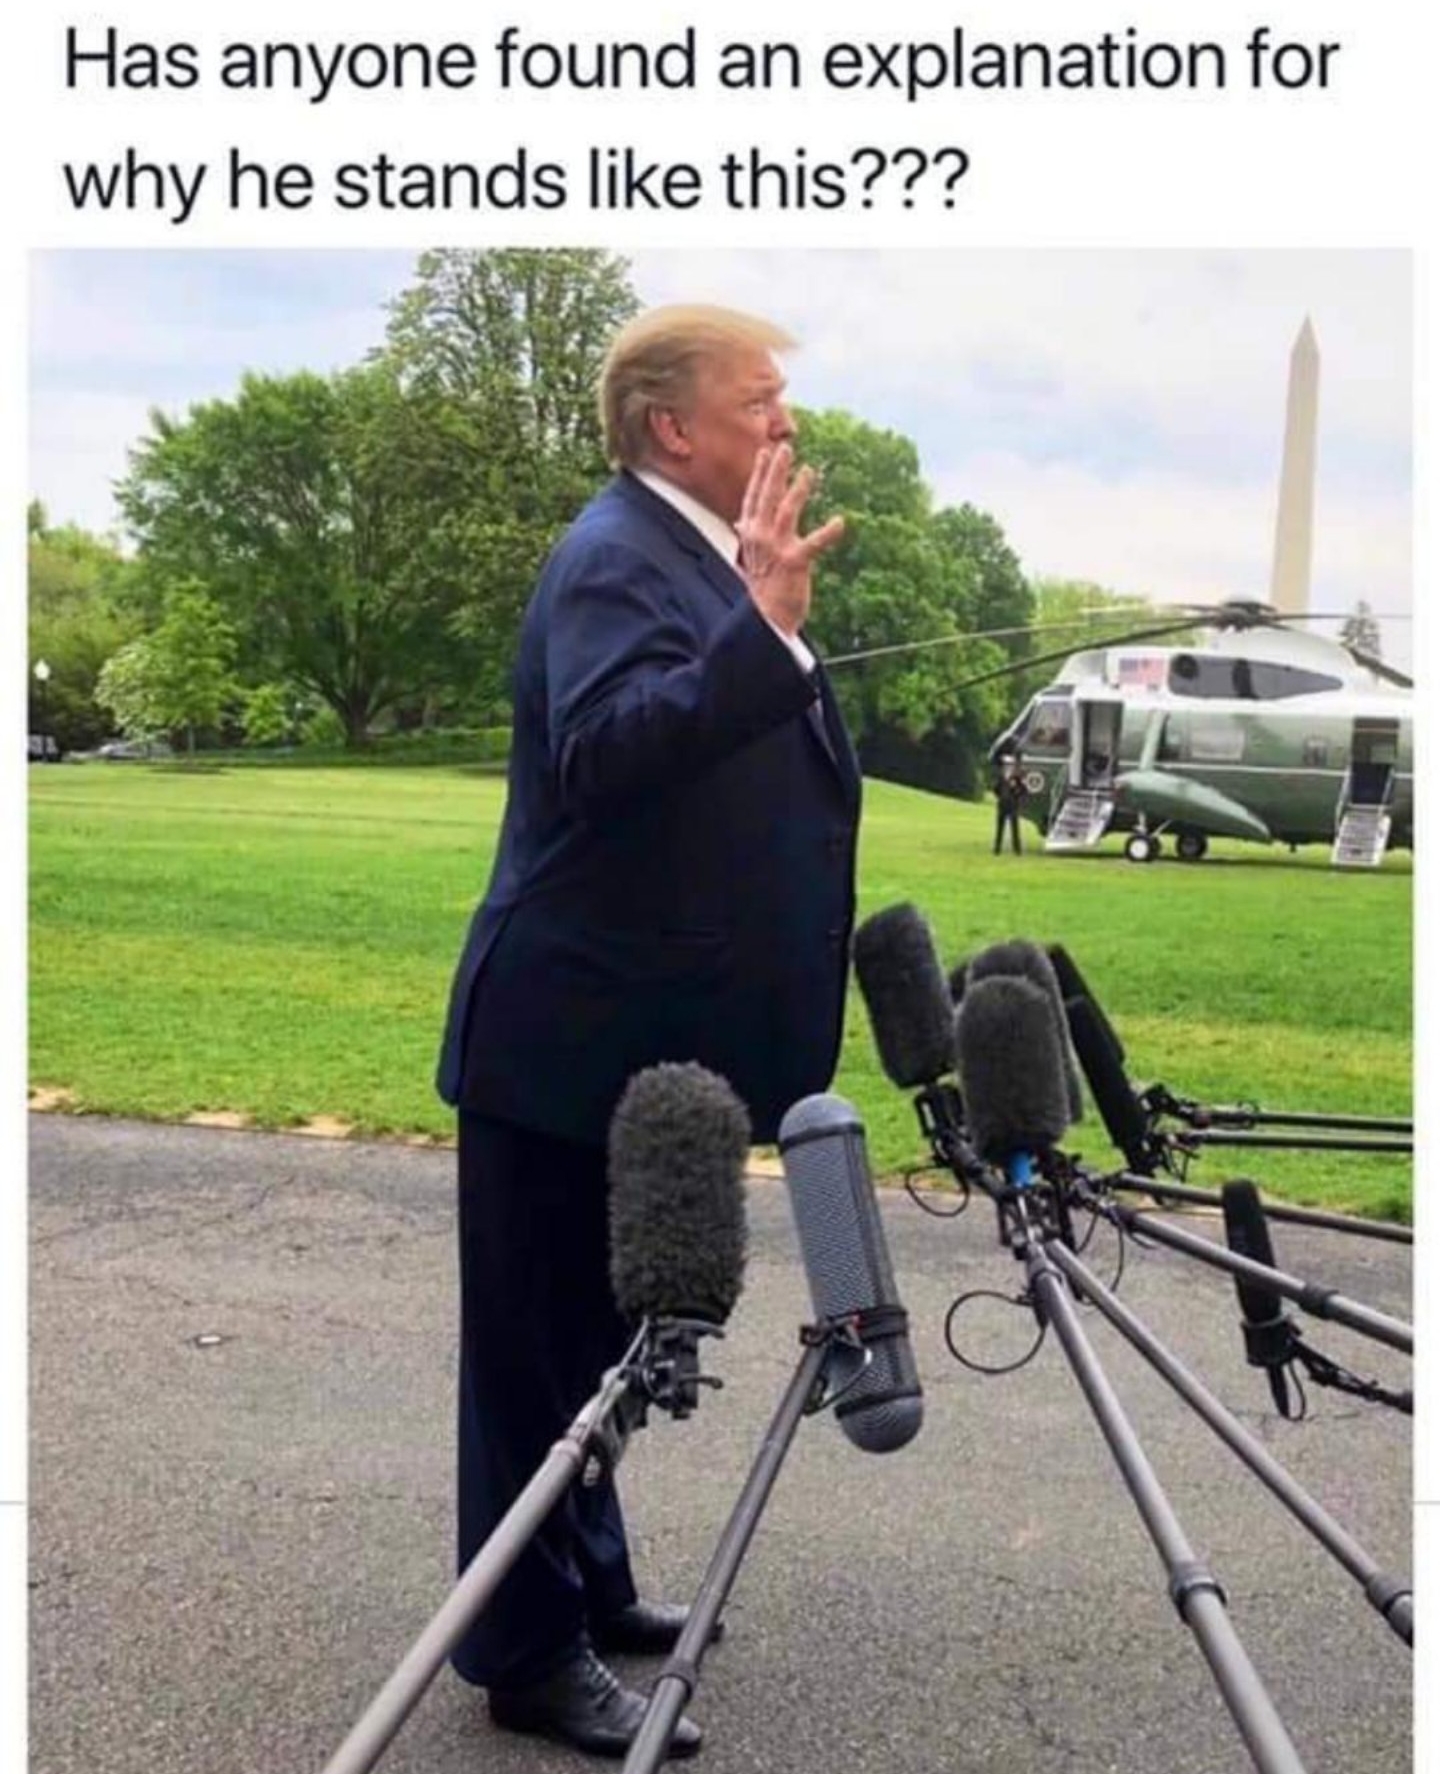 donald trump stands like a centaur - Has anyone found an explanation for why he stands this???